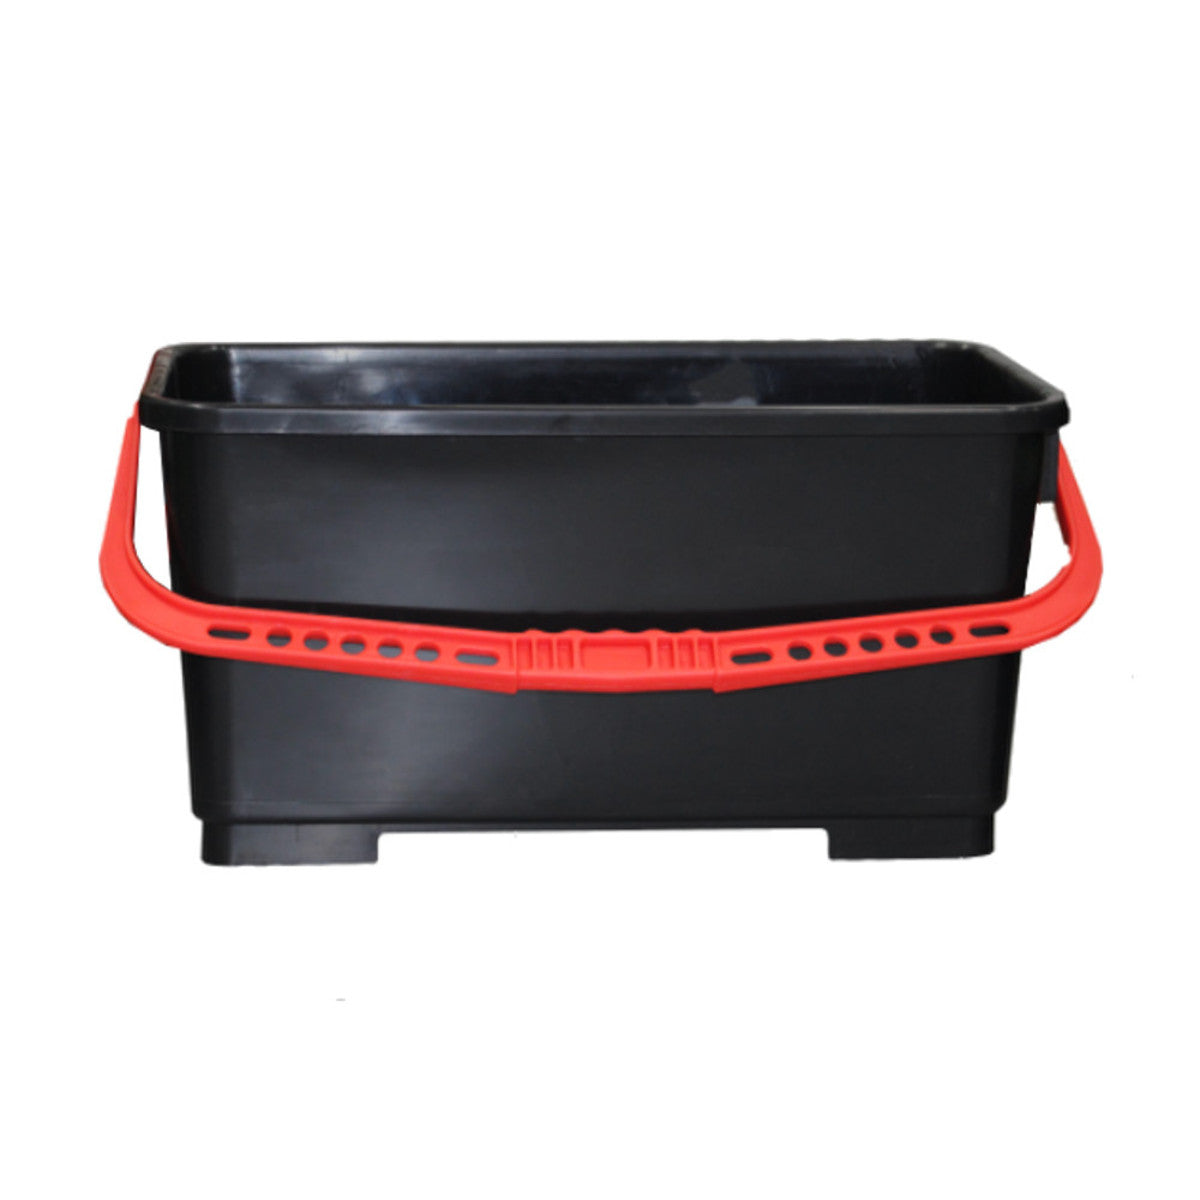 The Keith Kit Black Bucket with Red Handle